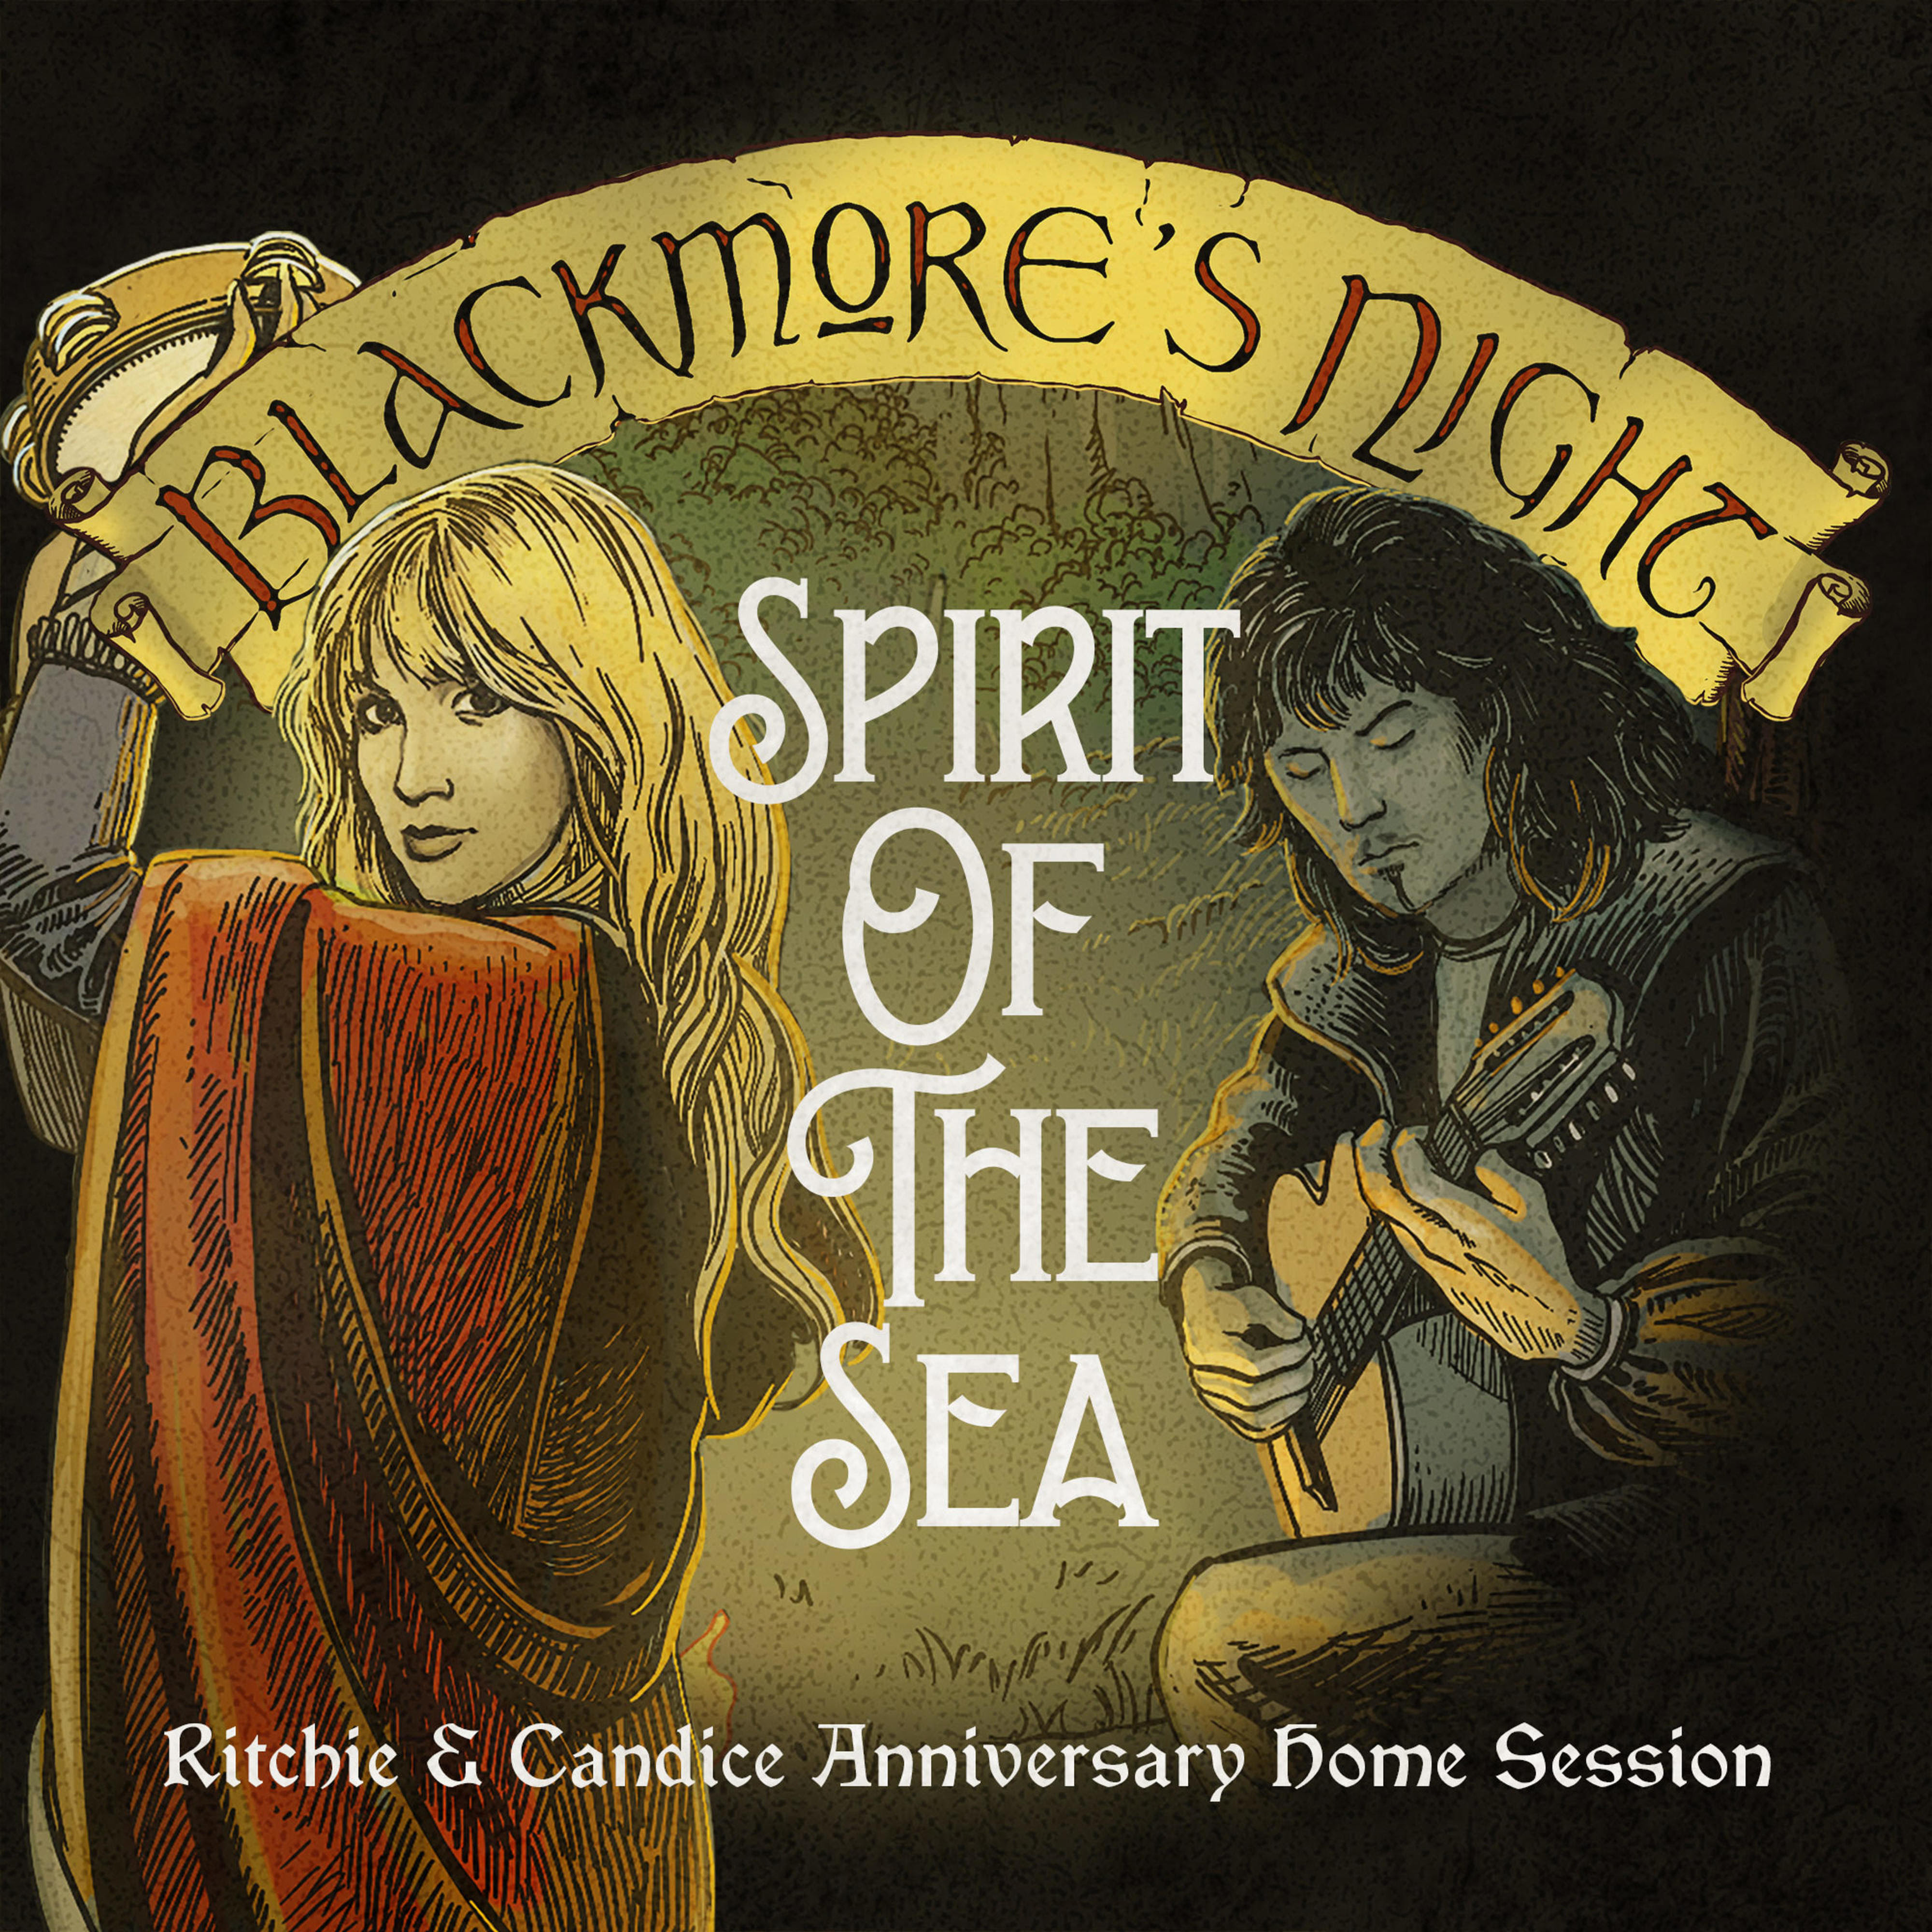 Blackmores night shadow of the moon. Blackmore's Night Spirit of the Sea (Ritchie & Candice Anniversary Home session) [Single] (2022). Blackmore's Night Shadow of the Moon. Sugababes – the Lost Tapes (2022). Blackmore's Night - Spirit of the Sea.